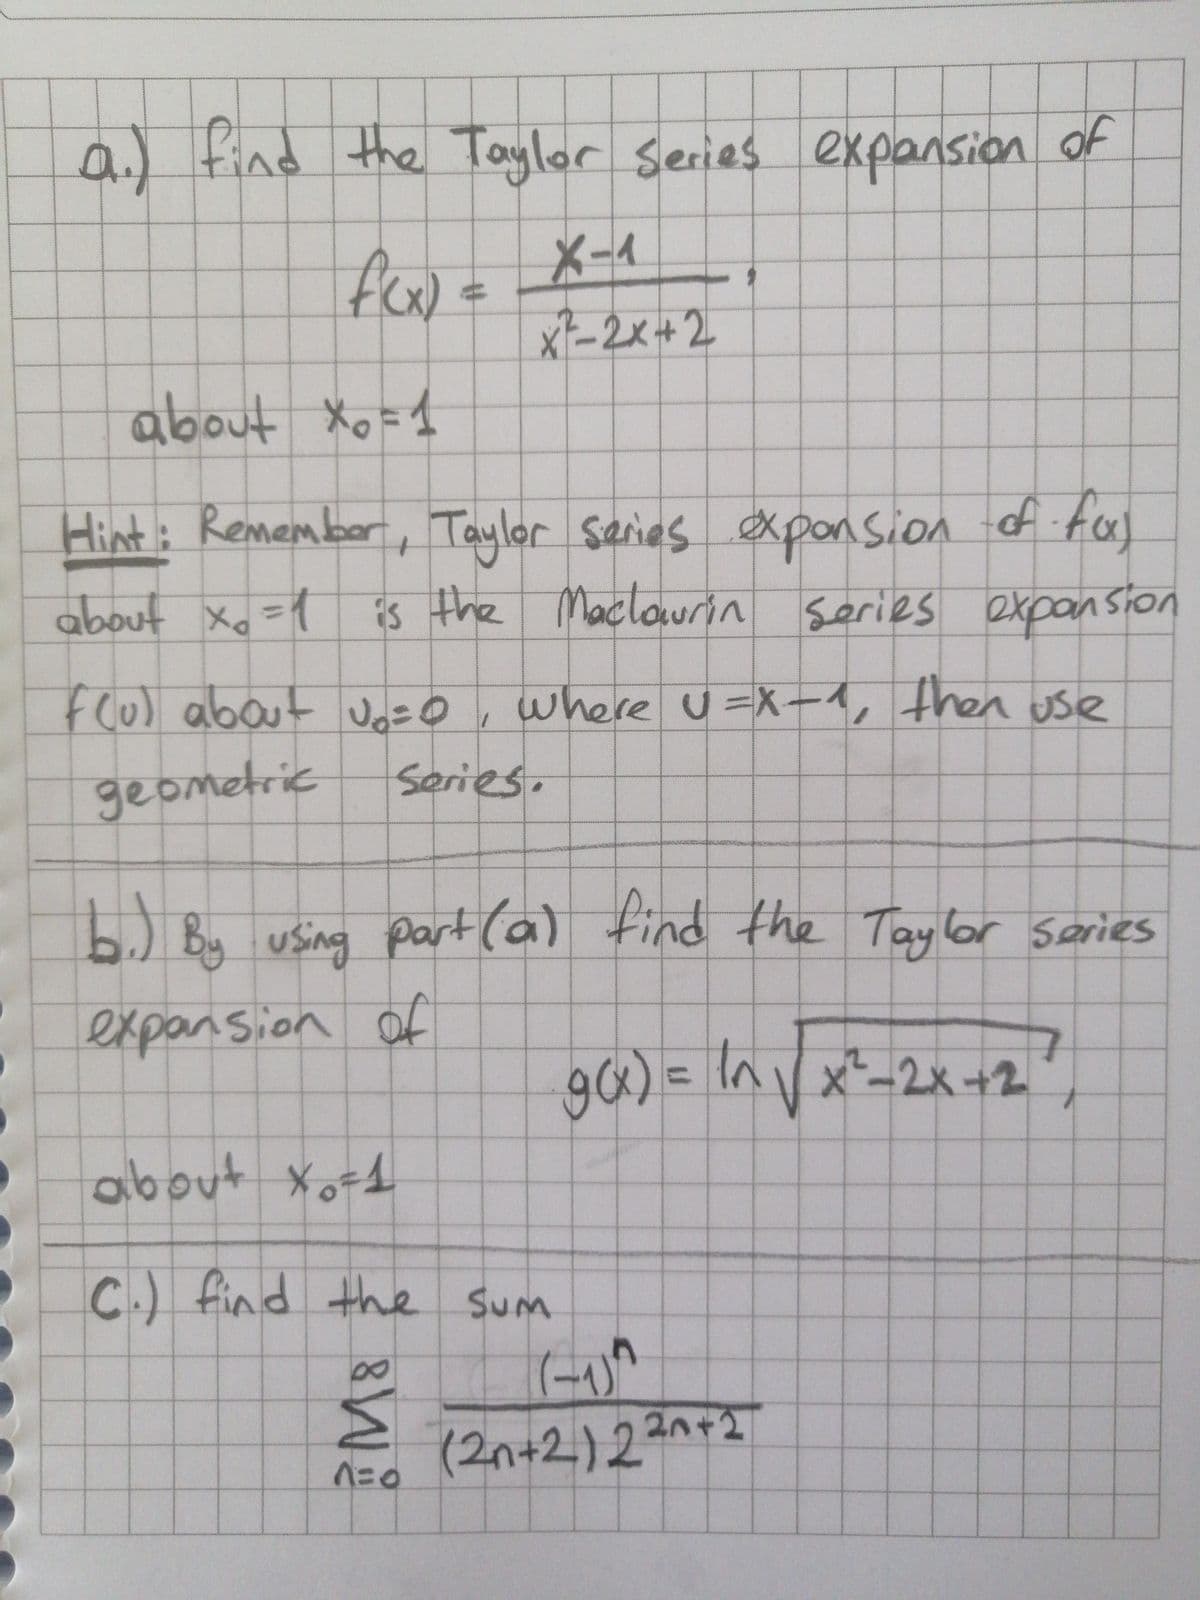 al find the Taylor series expansion of
X-1
x-2x+2
about Xo =1
of.
Hint: Remember , Taylor saries exponsion f tcx)
about Xo =1 is the Maclowrin serie
s expan sion
Flu) about Jo=O ,
where u=X-4, then use
geometric
Series.
b.) By using ) tind the Taylor series
part(a)
expansion of
90) = In V x²-2x+2
%3D
about
C.) find the sum
SUM
(-1)
8.
(2n+2)222
M
